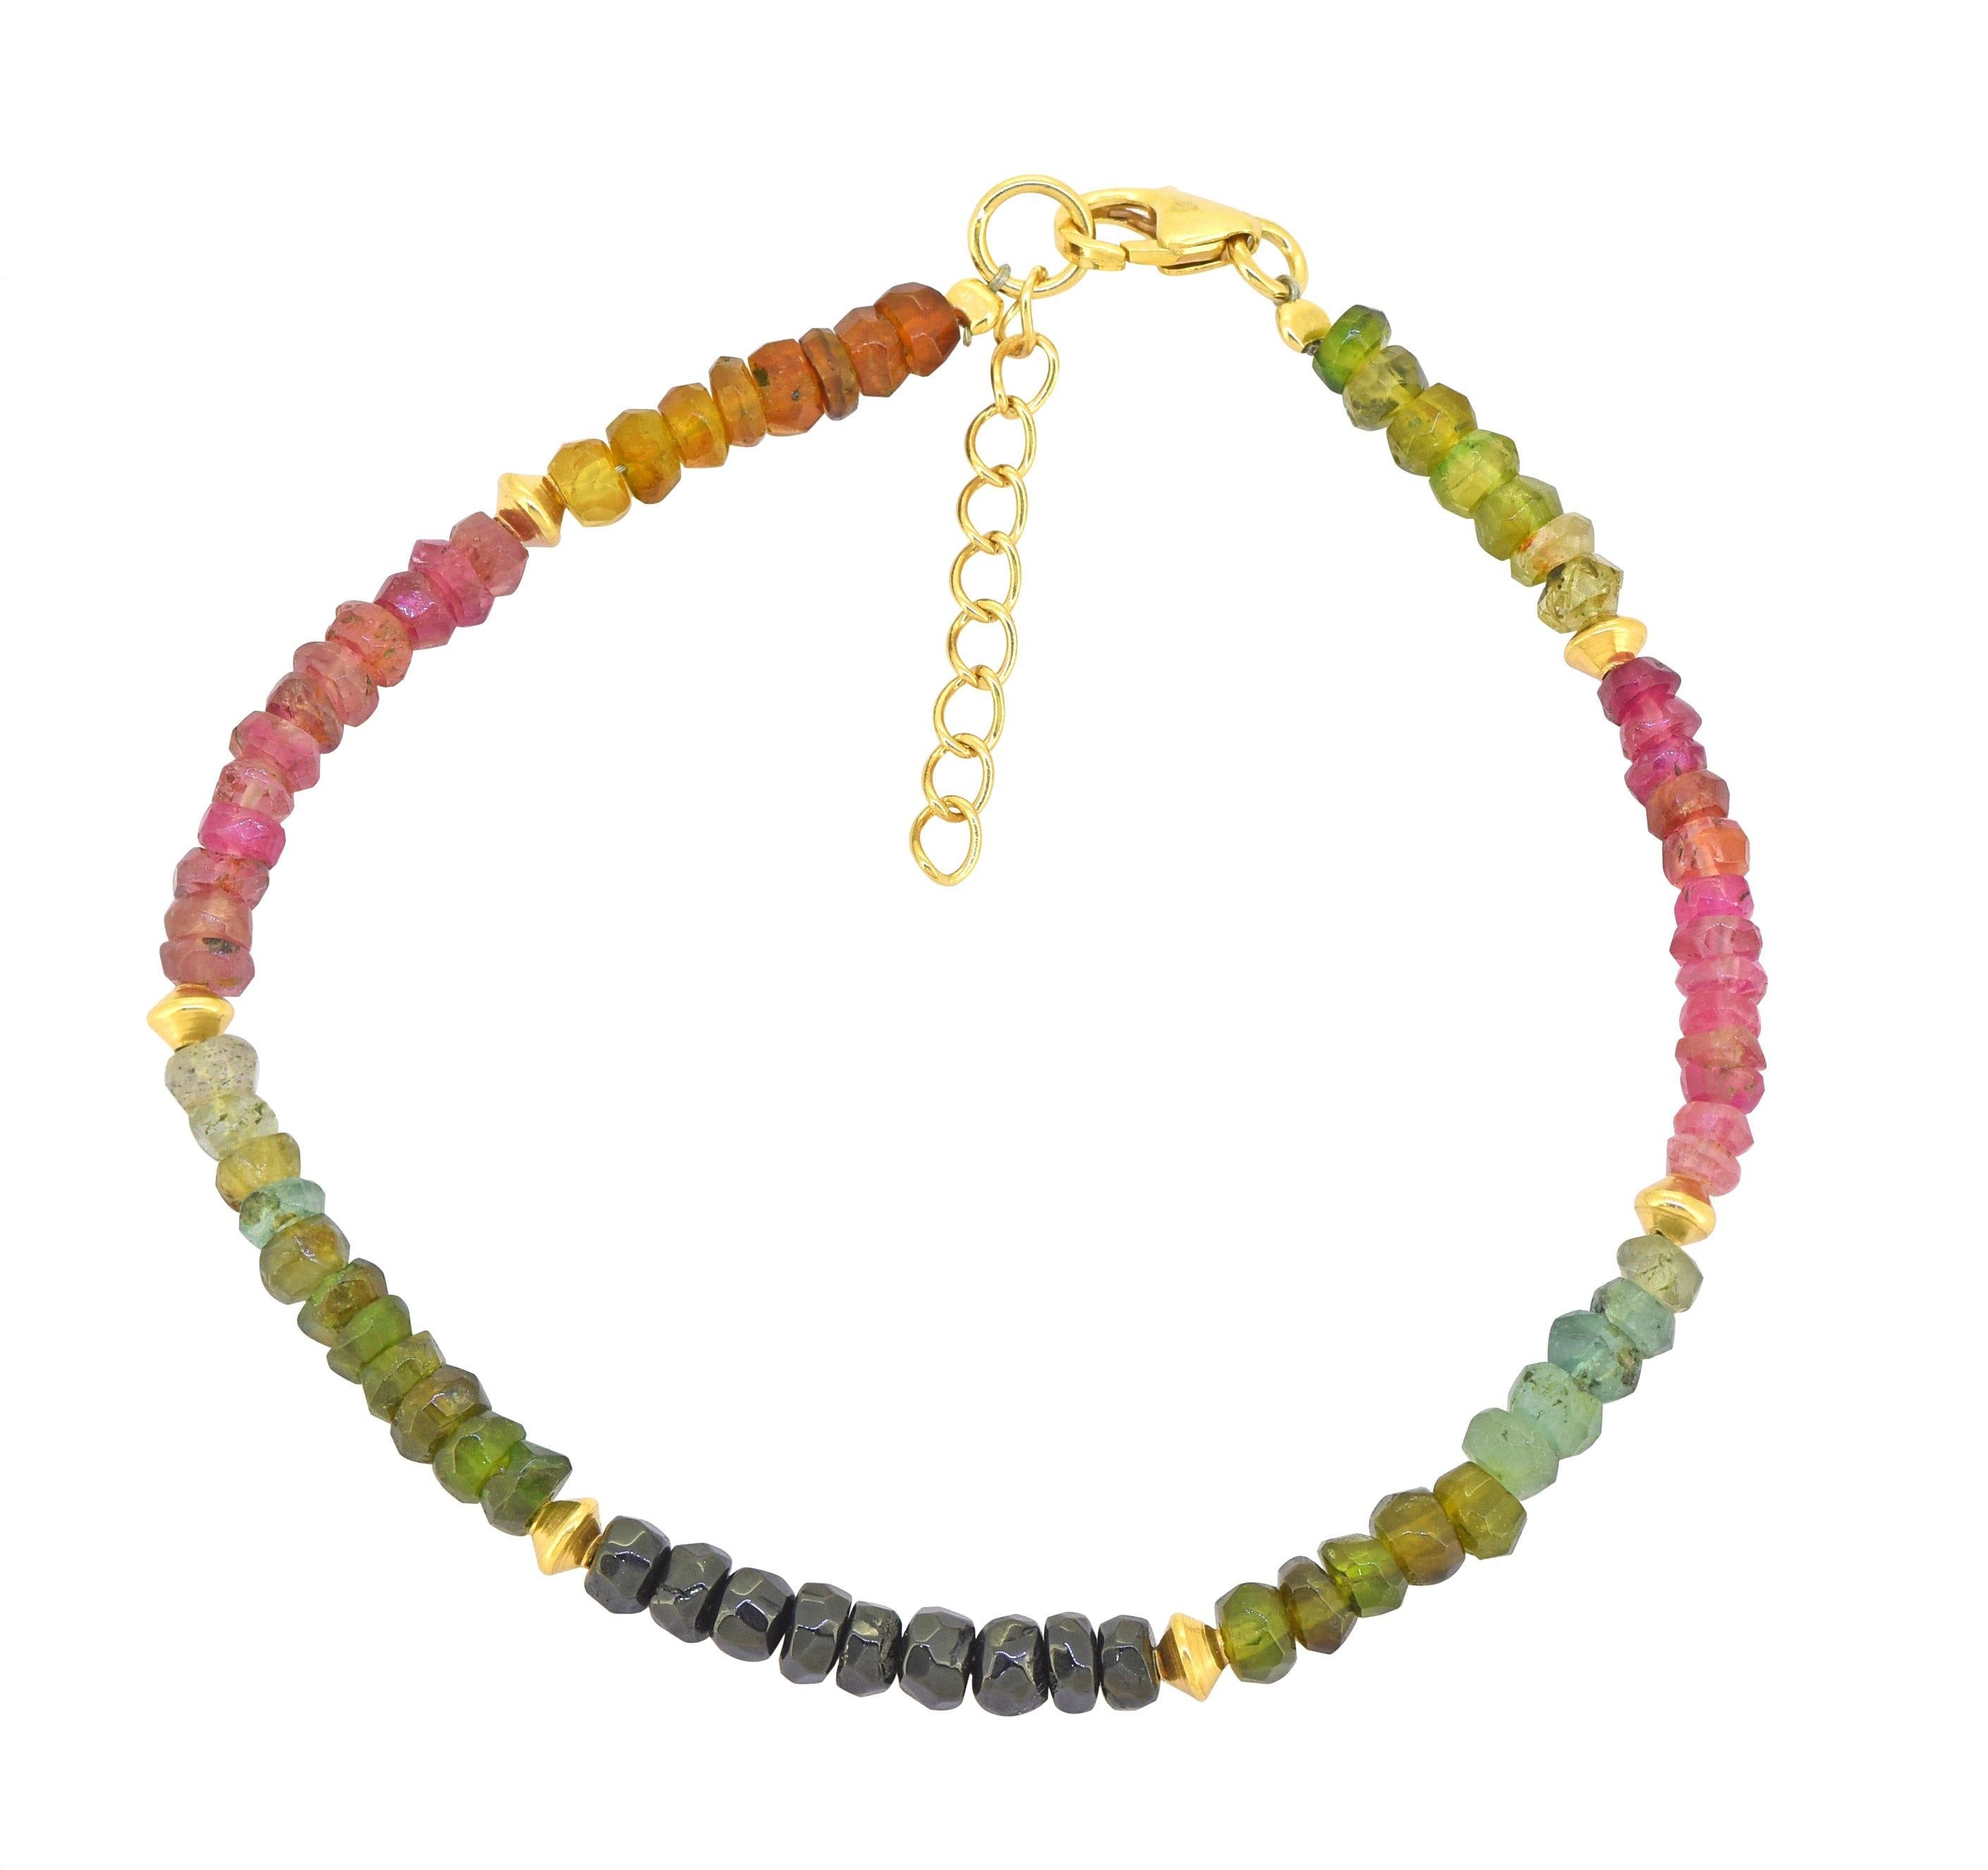 Multi Tourmaline Solid 925 Sterling Silver Gold Plated Link Chain Bracelet 8" - YoTreasure